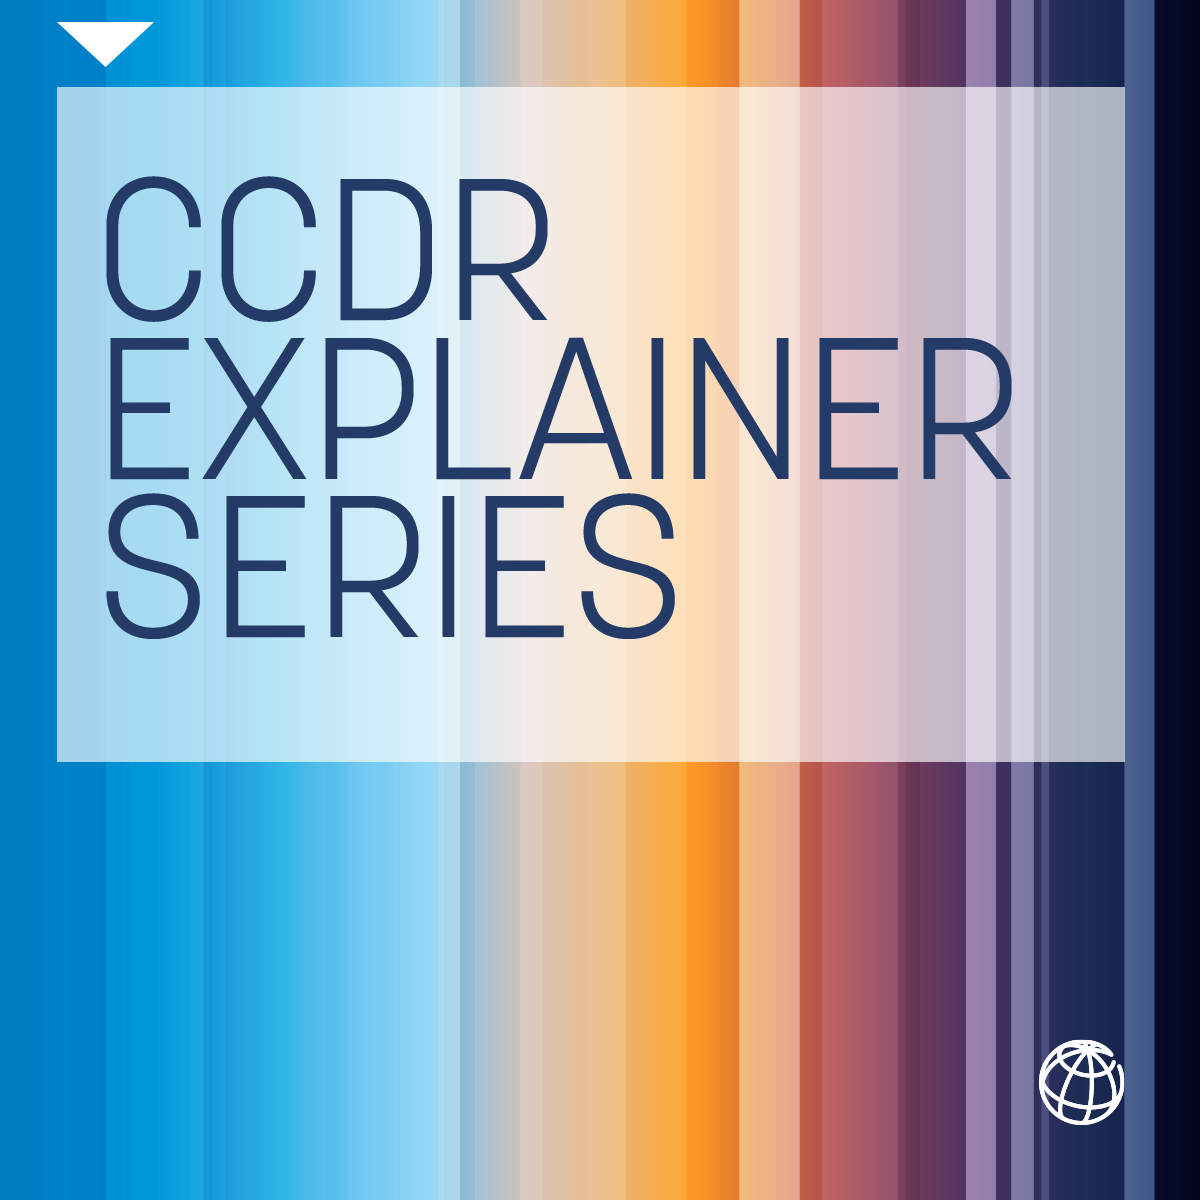 CCDR Explainer Series banner - square